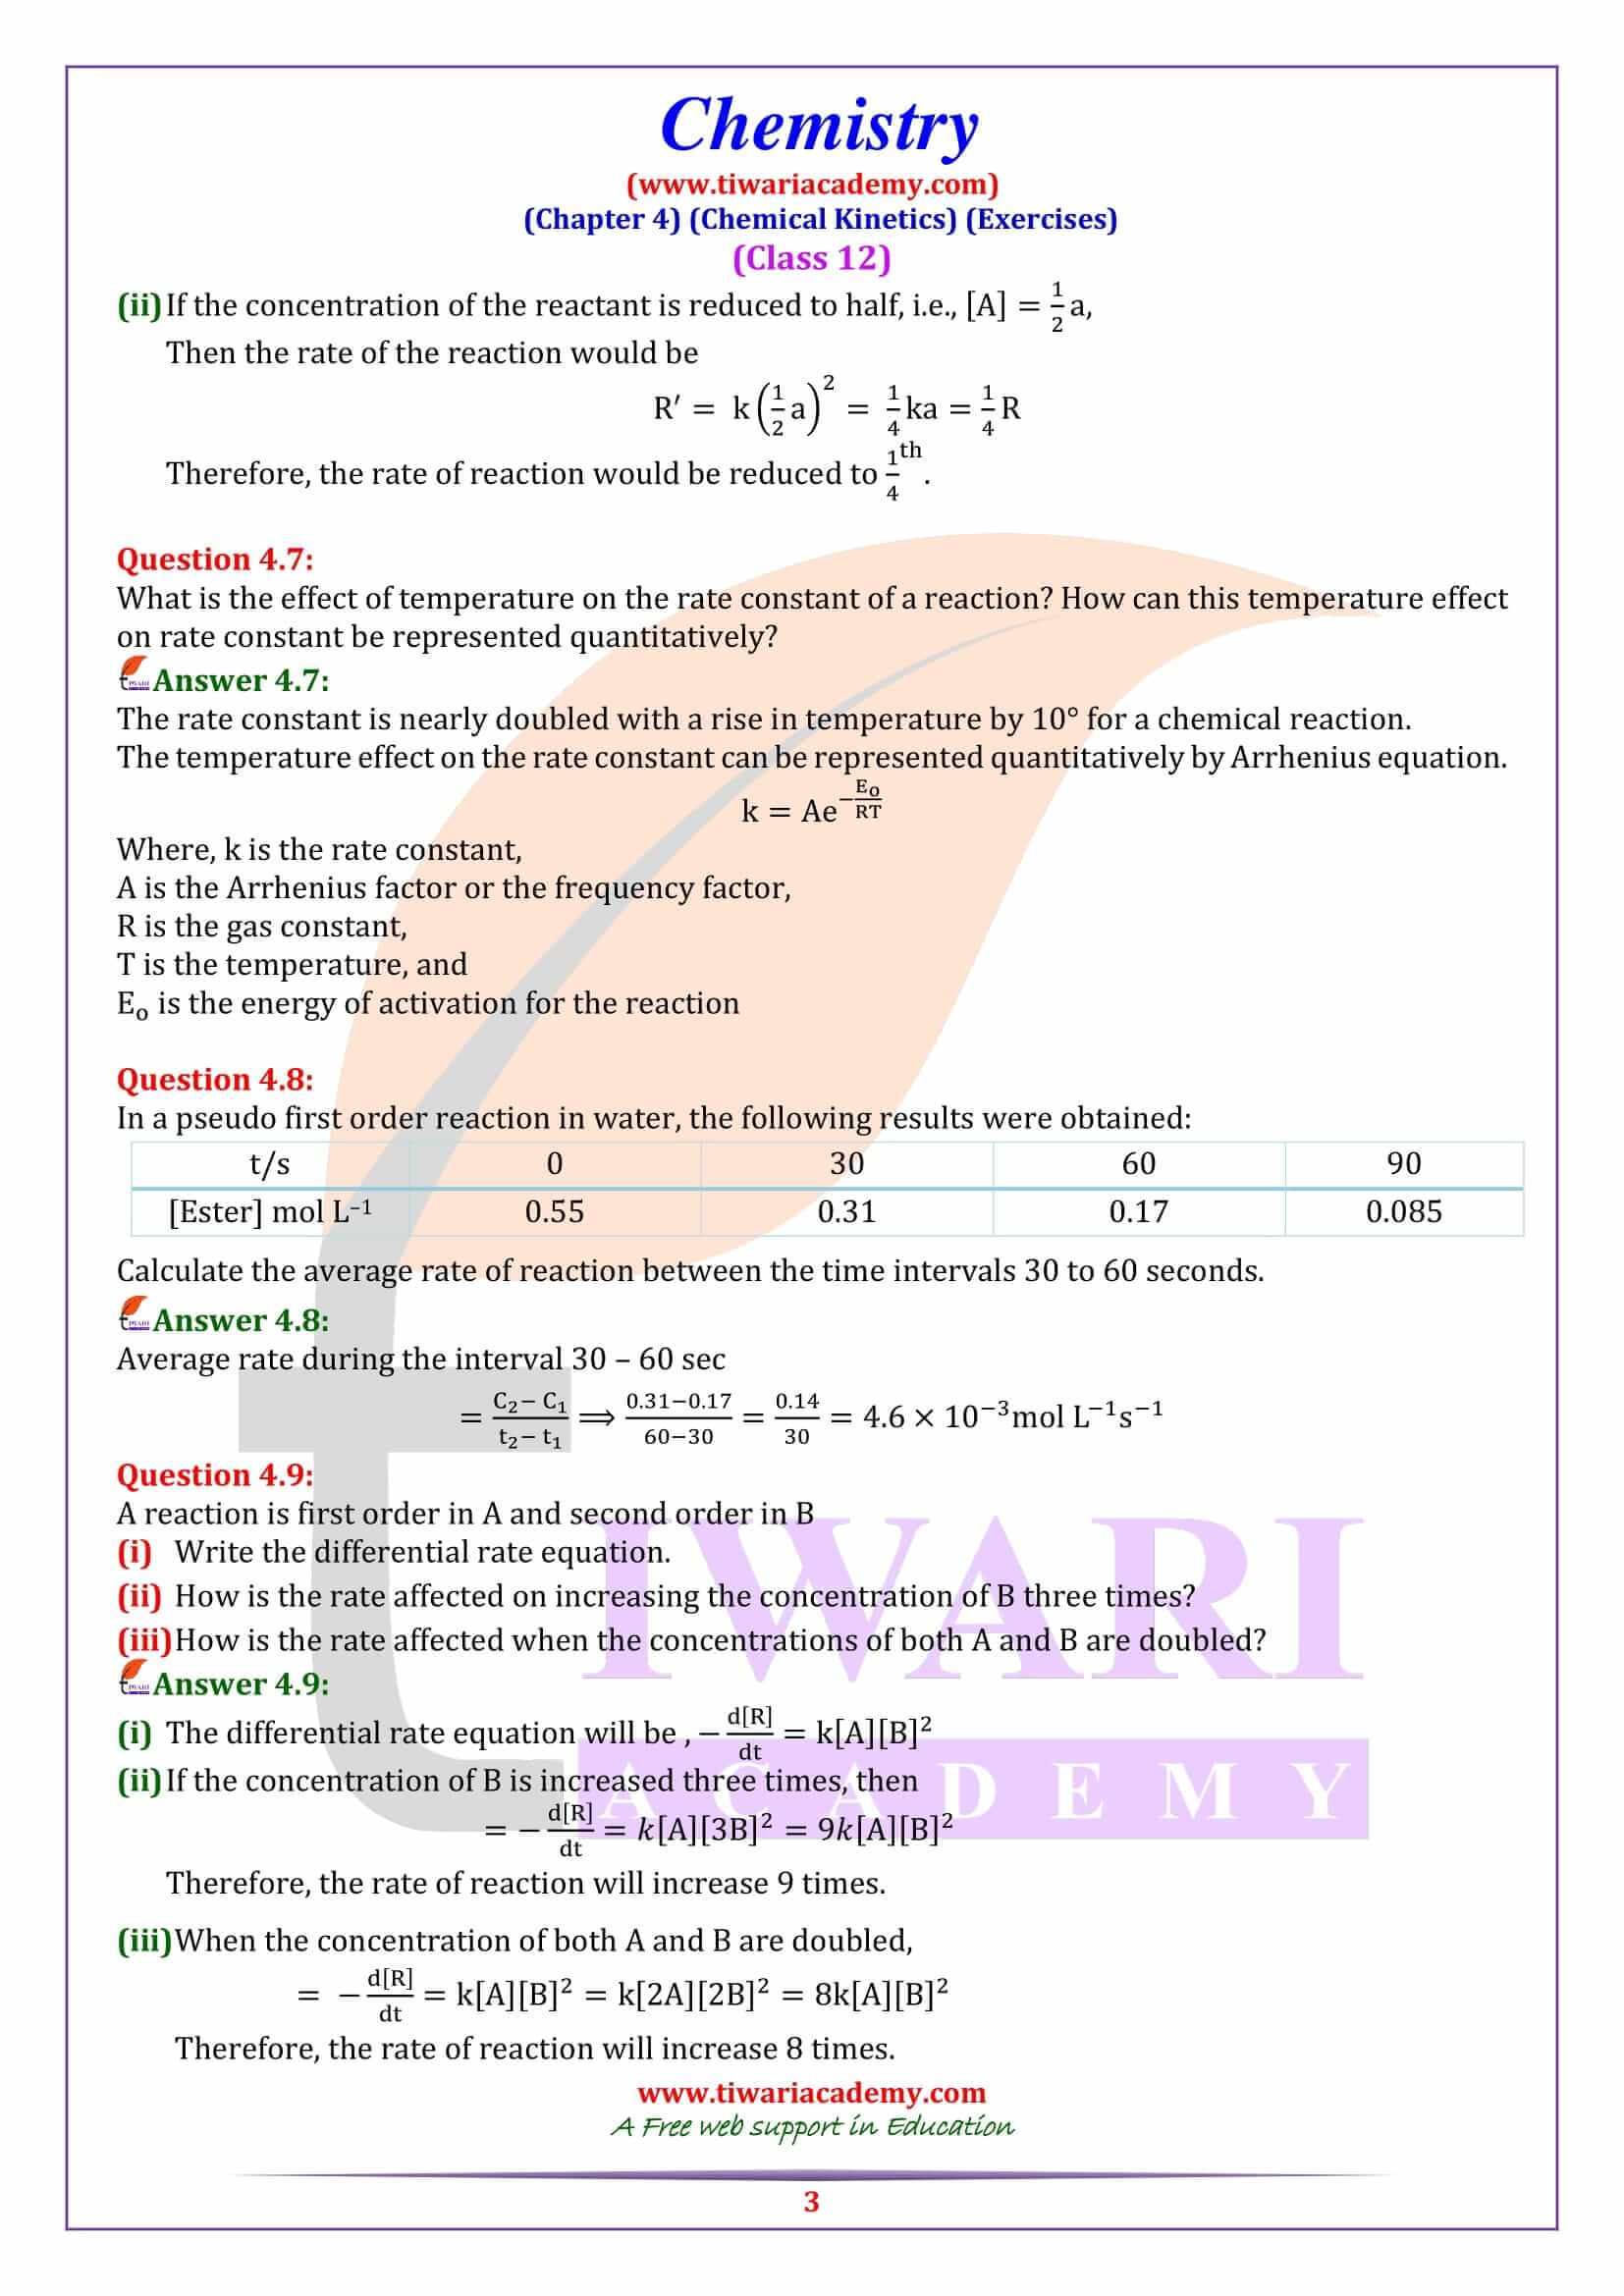 NCERT Solutions for Class 12 Chemistry Chapter 4 Exercises